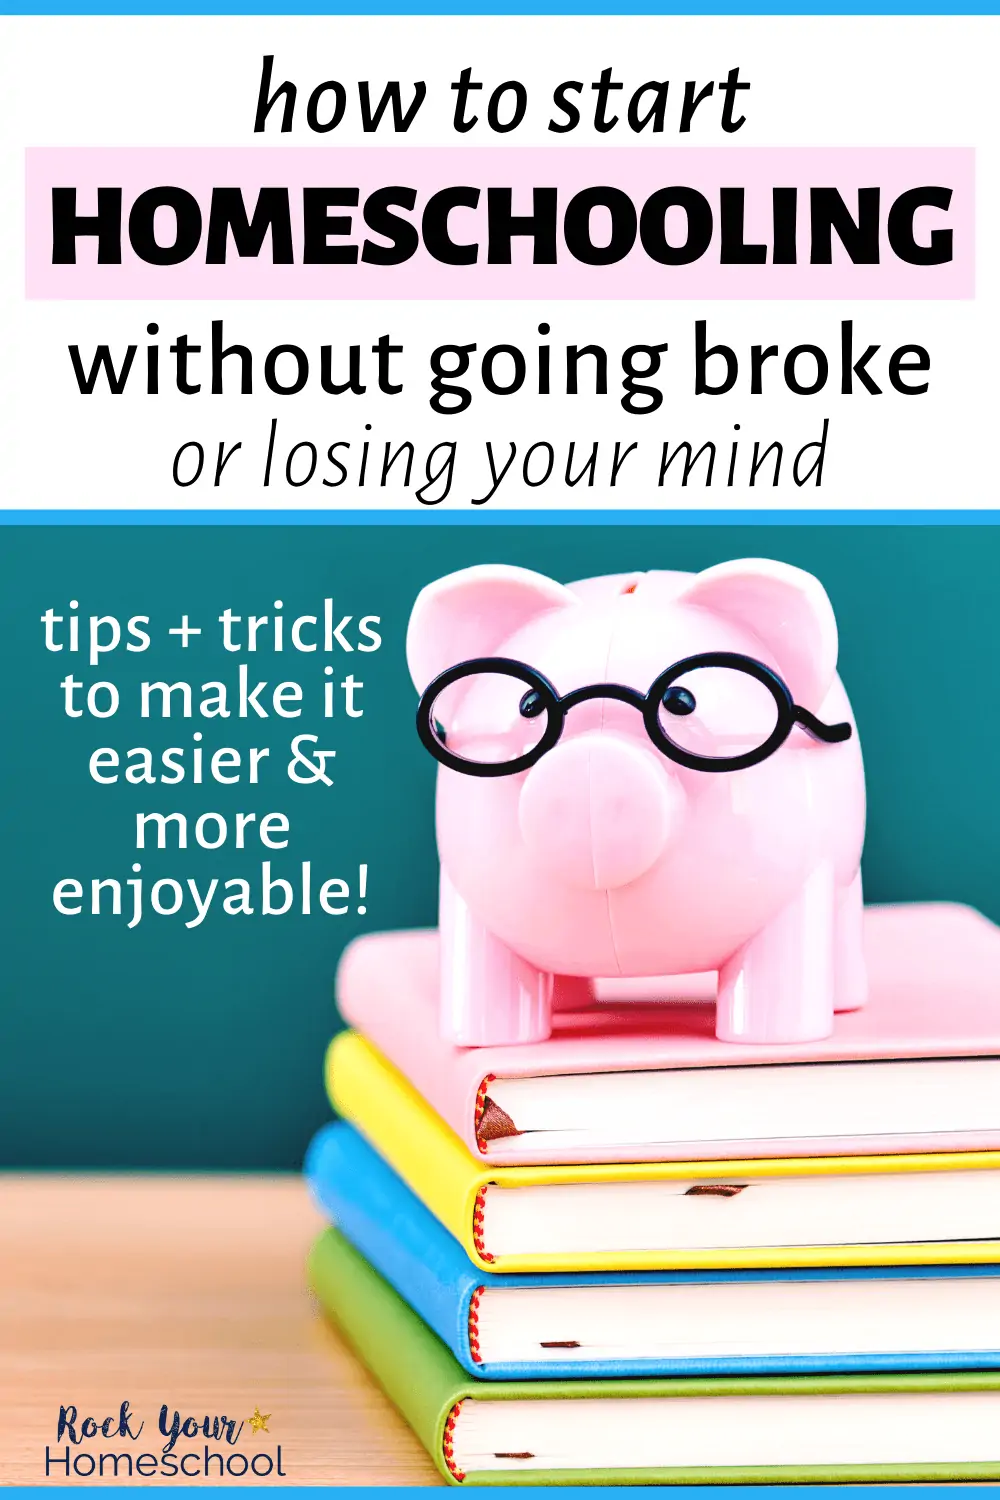 How to Start Homeschooling Without Going Broke (Or Losing Your Mind)